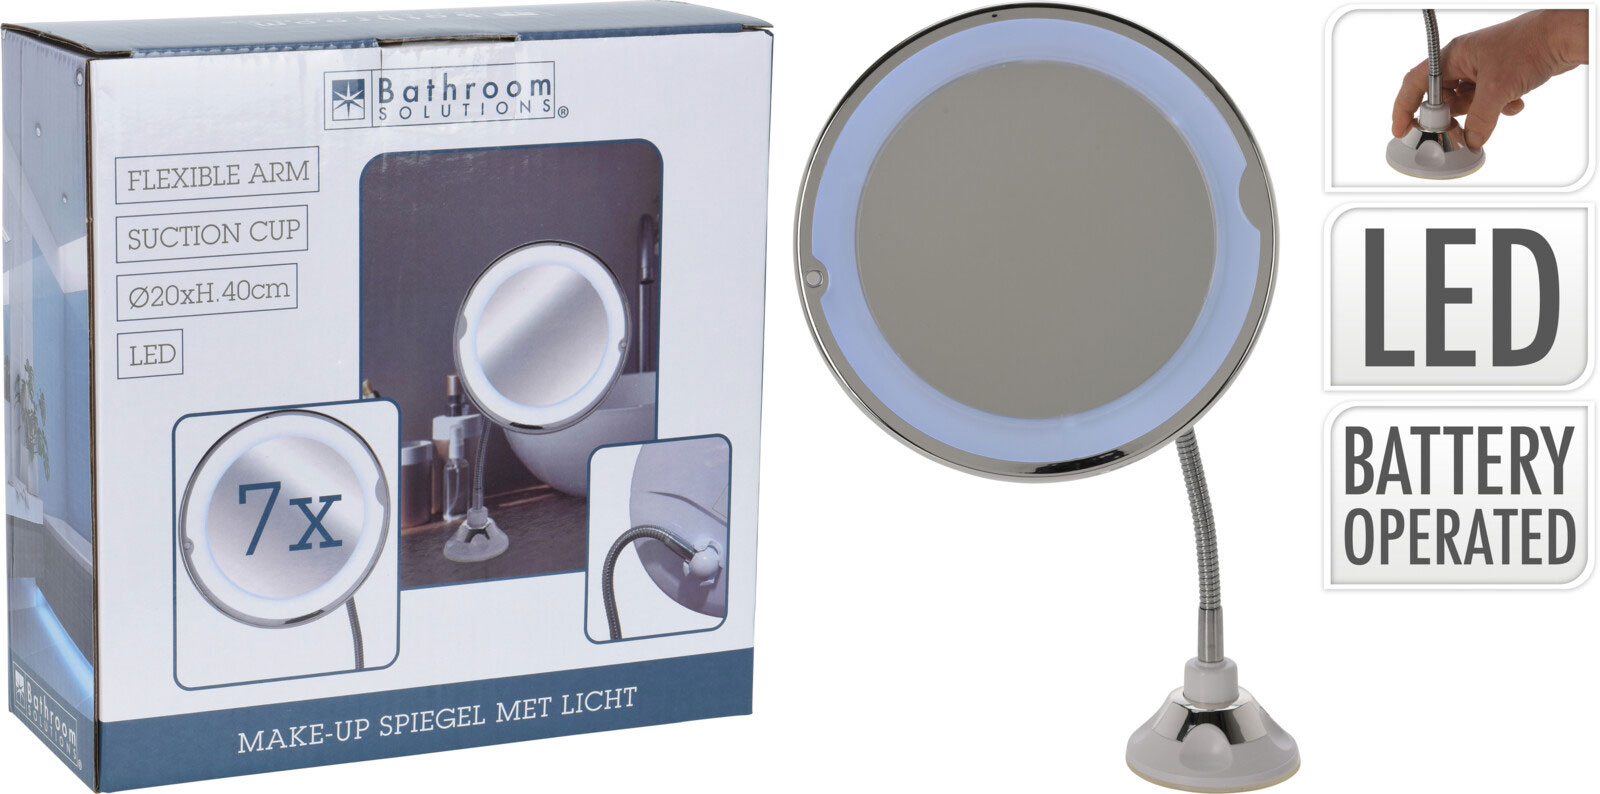 MAKE UP MIRROR WITH LED LIGHT